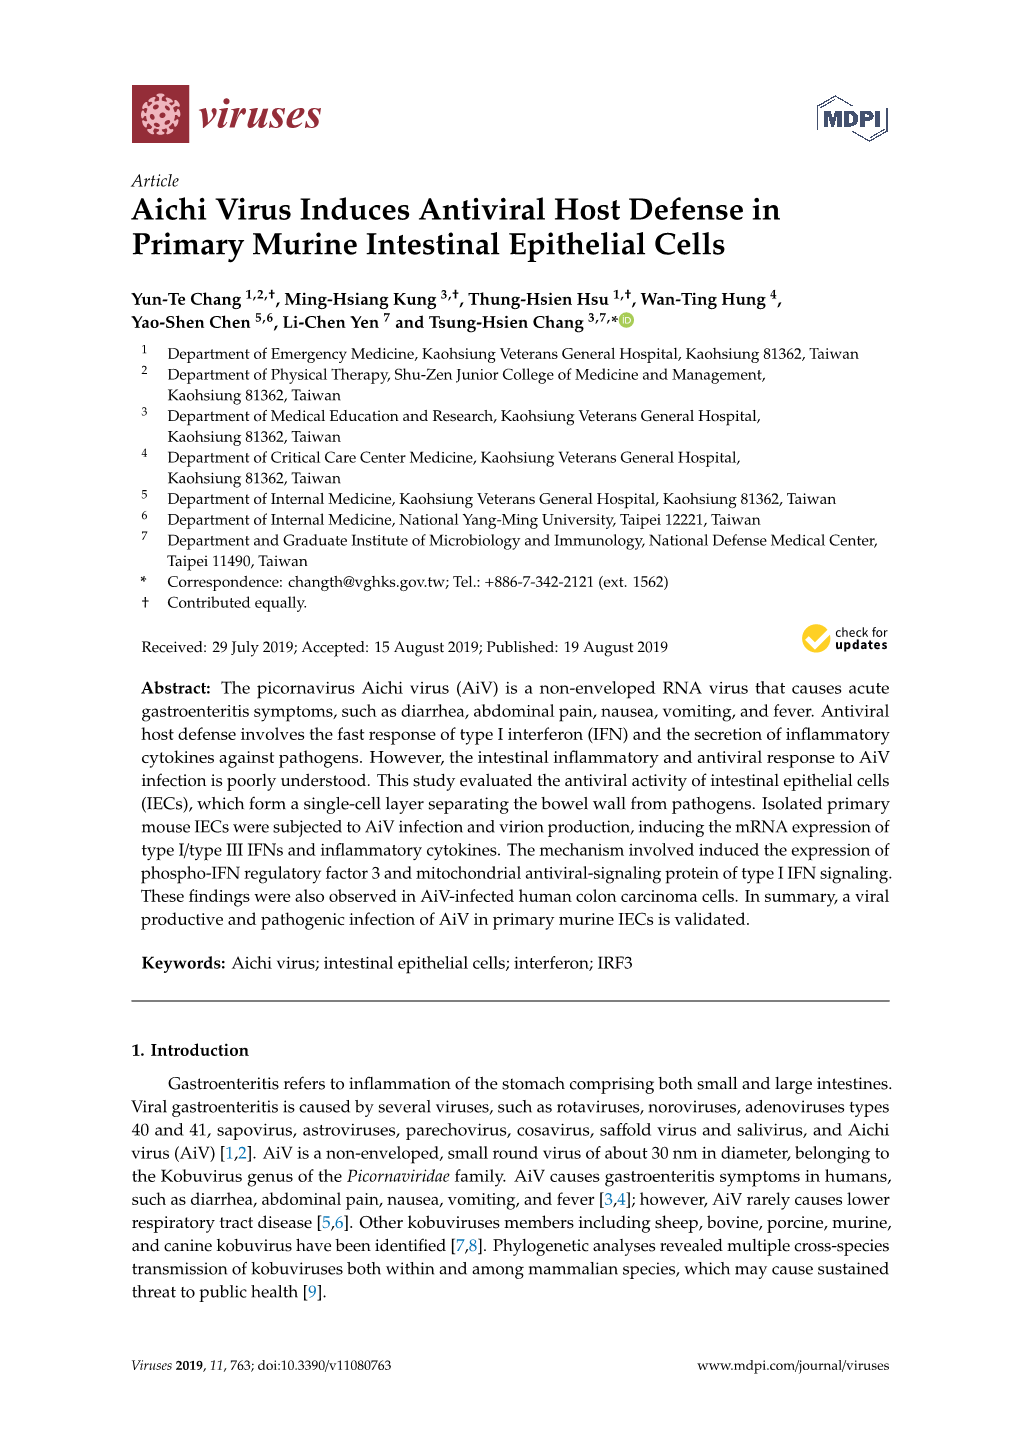 Aichi Virus Induces Antiviral Host Defense in Primary Murine Intestinal Epithelial Cells